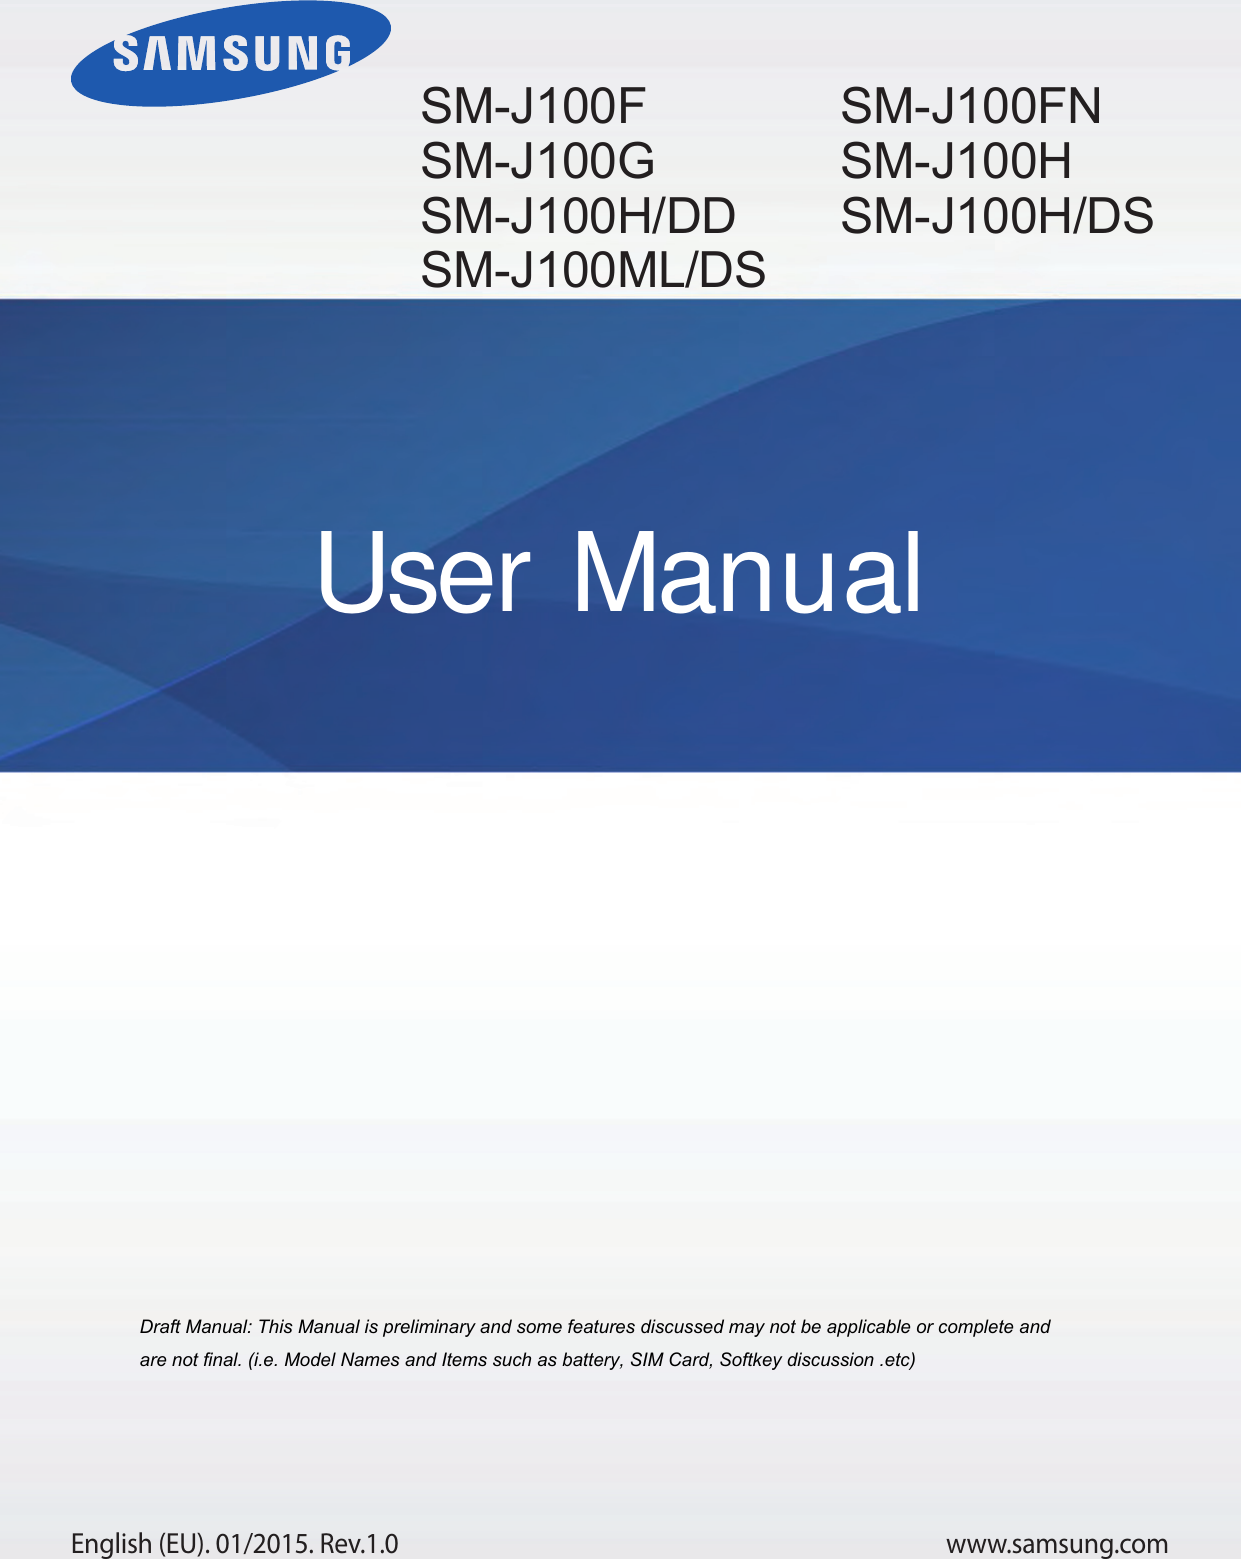 www.samsung.comUser ManualEnglish (EU). 01/2015. Rev.1.0Draft Manual: This Manual is preliminary and some features discussed may not be applicable or complete and are not final. (i.e. Model Names and Items such as battery, SIM Card, Softkey discussion .etc)SM-J100F SM-J100G SM-J100H/DDSM-J100ML/DSSM-J100FN SM-J100H SM-J100H/DS